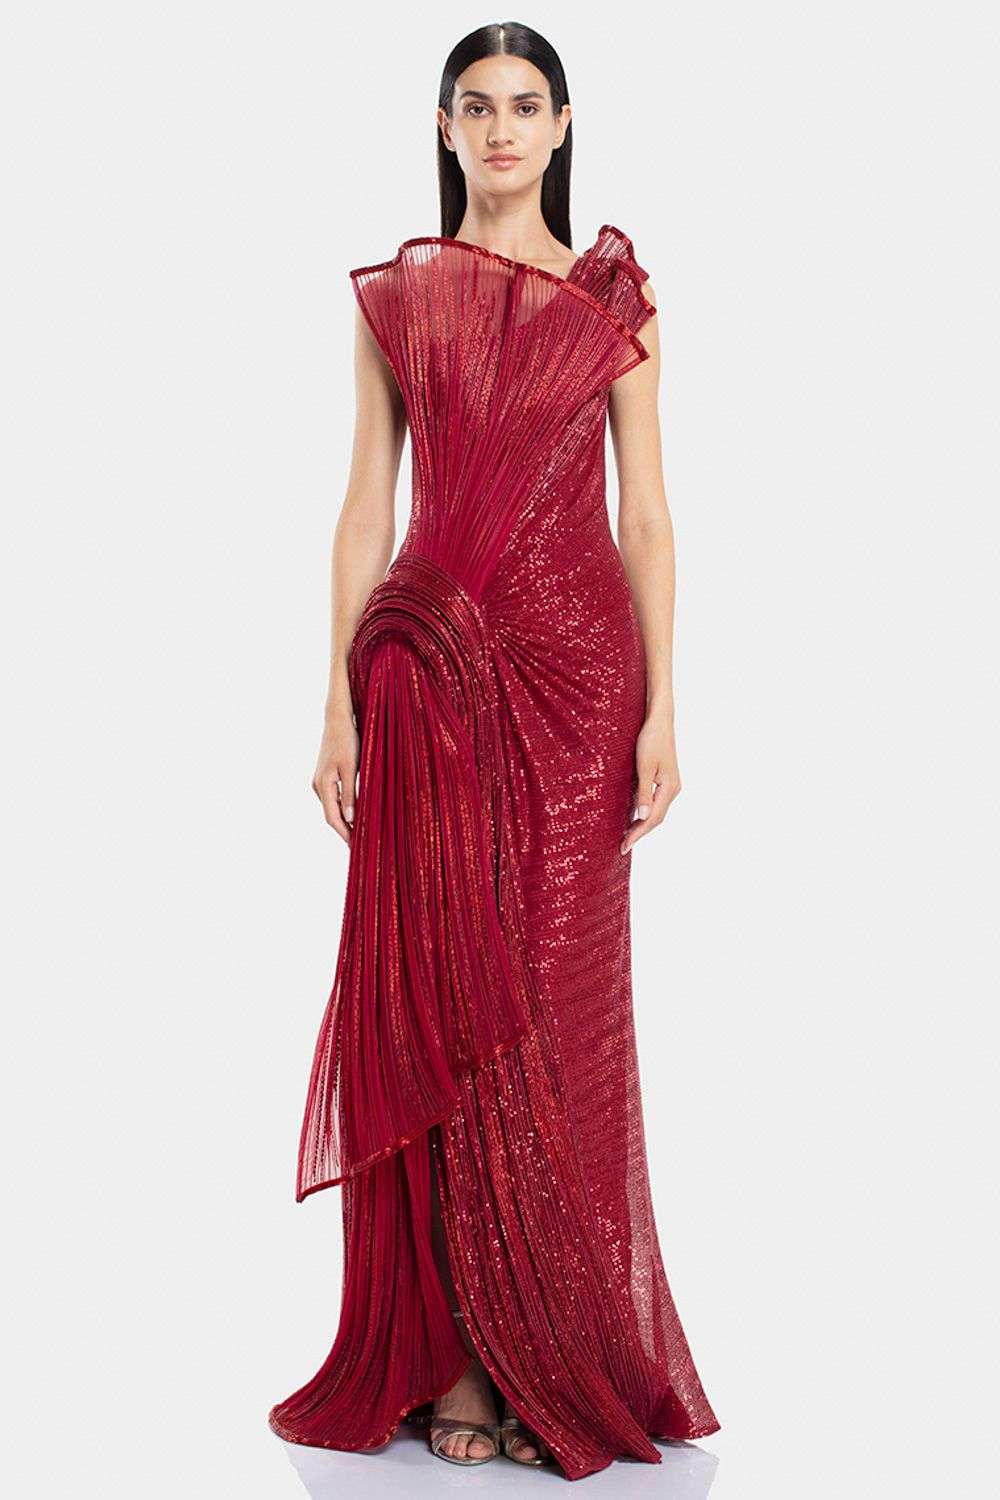 Red Sequin Mermaid Red Sequin Prom Dress With Long Sleeves And Side Slit  For Women Shiny Bling, Perfect For Evening Parties And Christmas From  Weddingdress1989, $113.62 | DHgate.Com